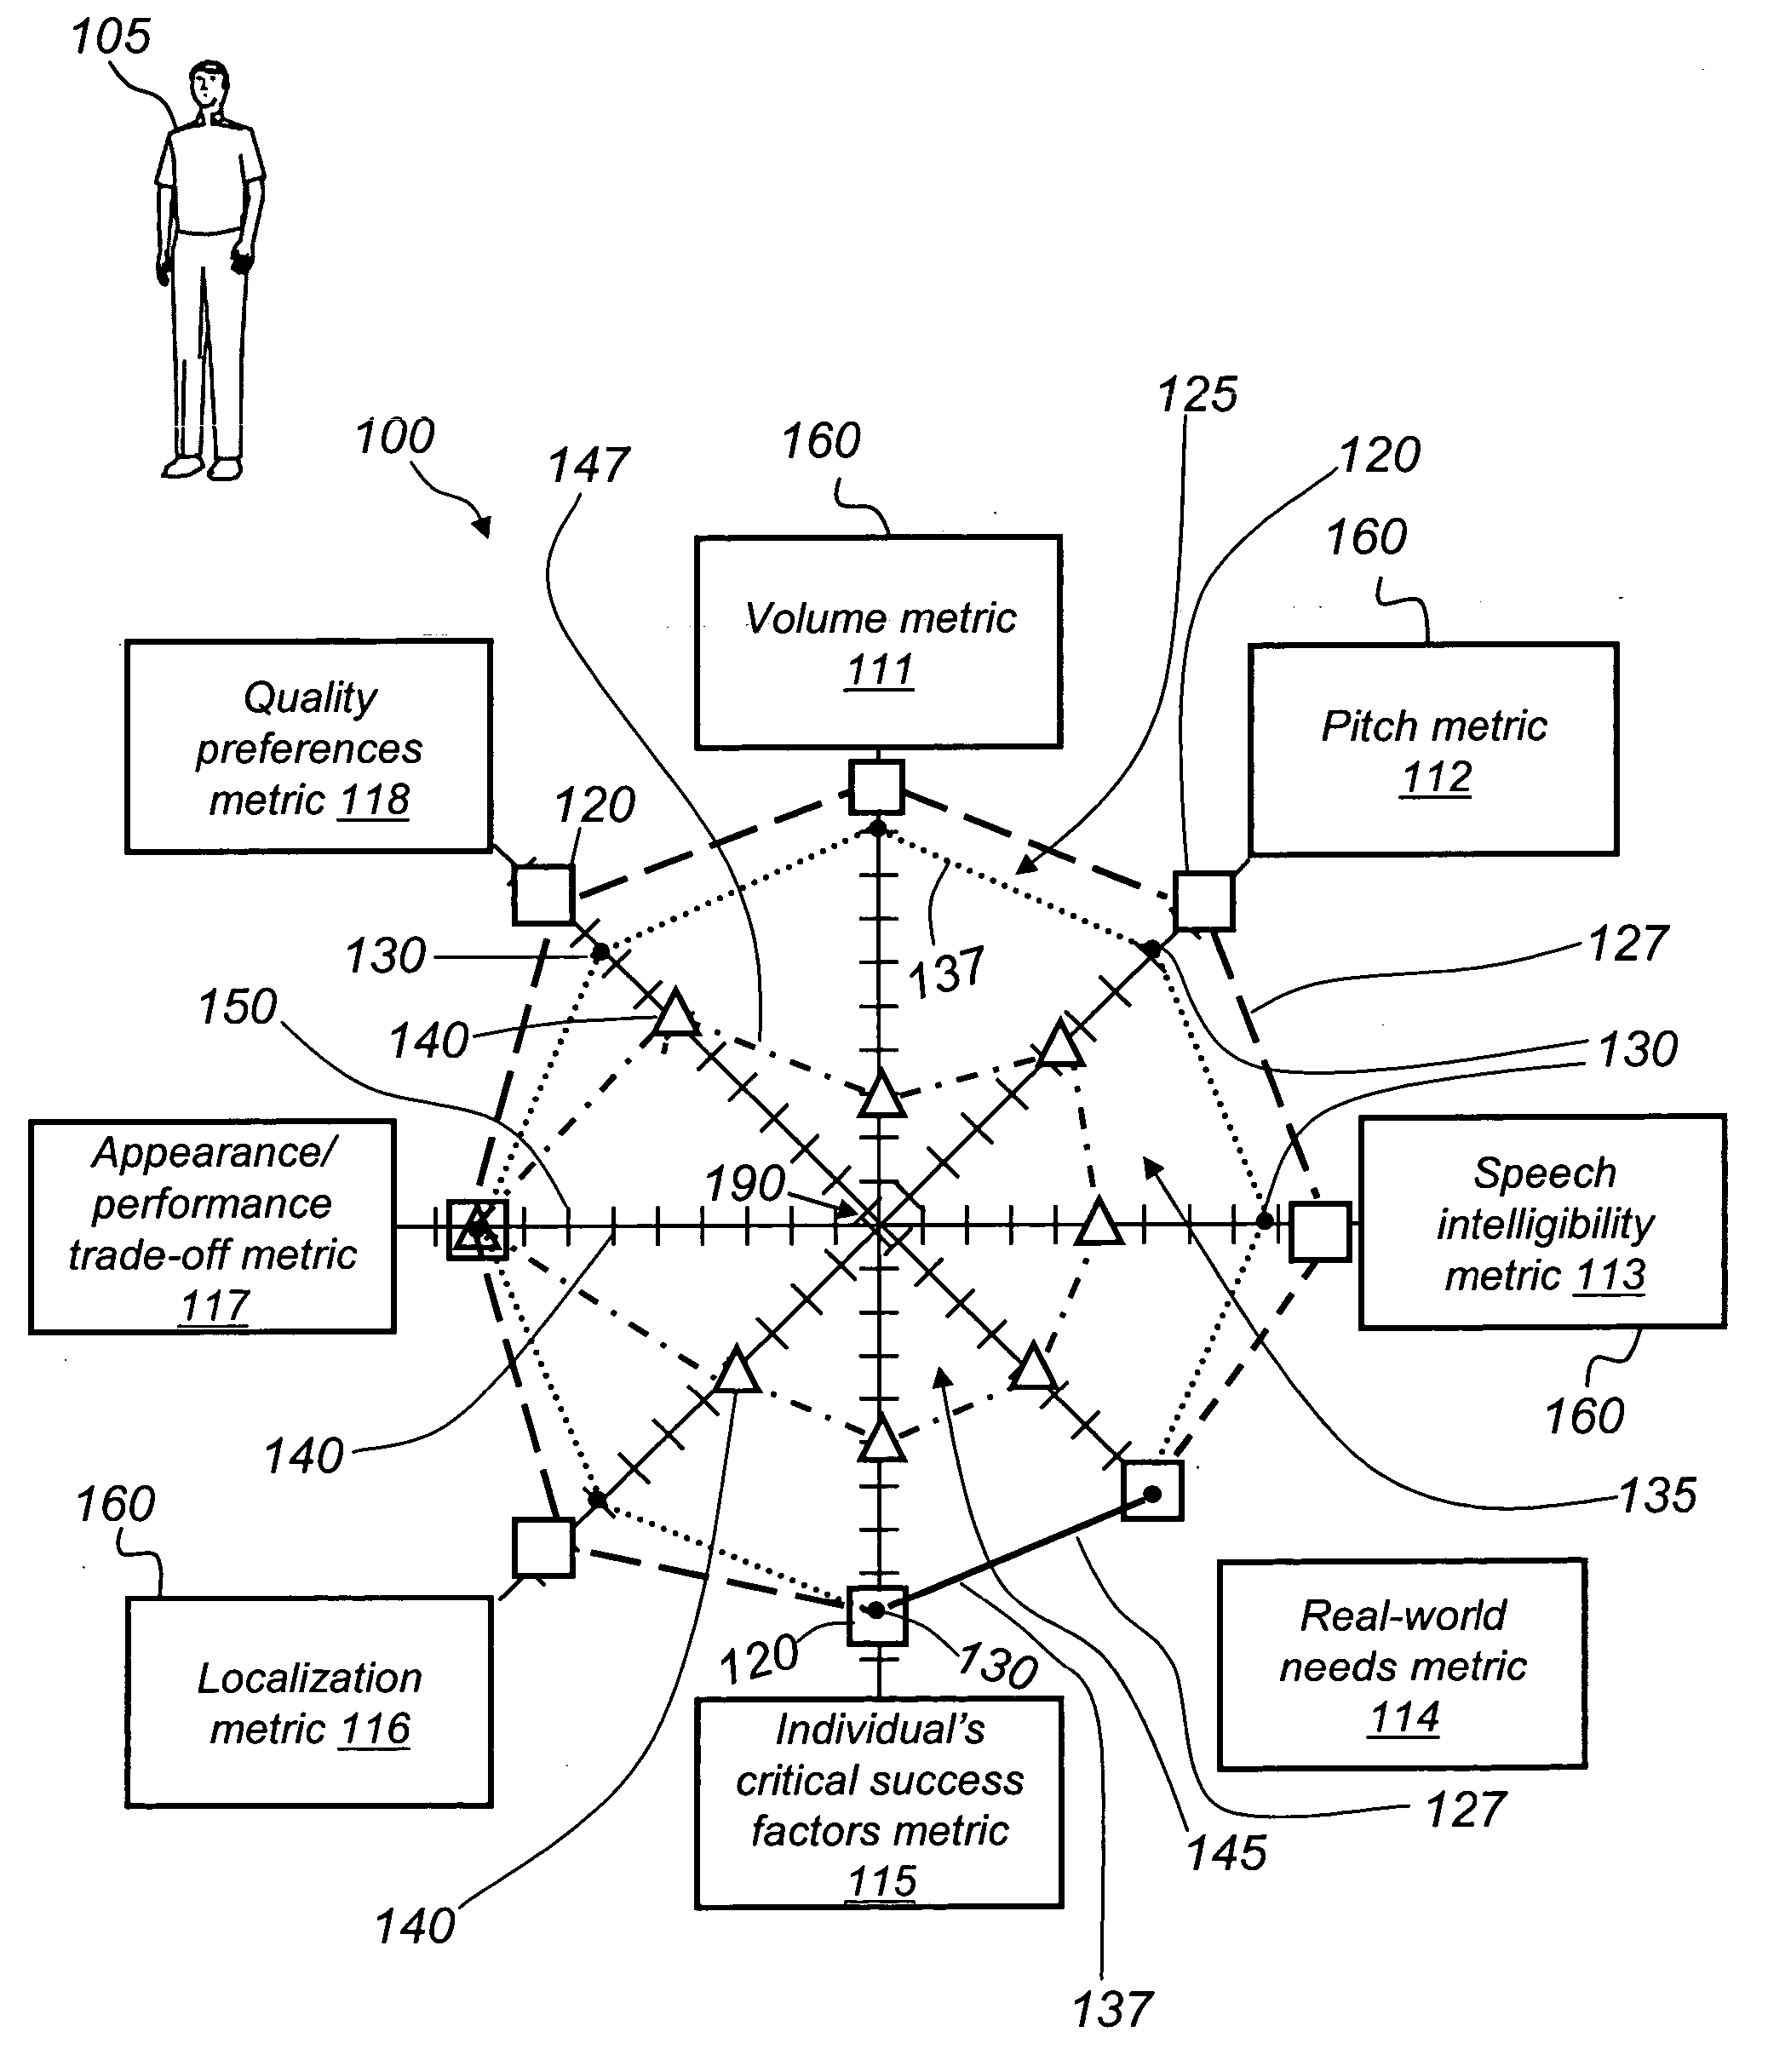 Method and system for rehabilitating a medical condition across multiple dimensions